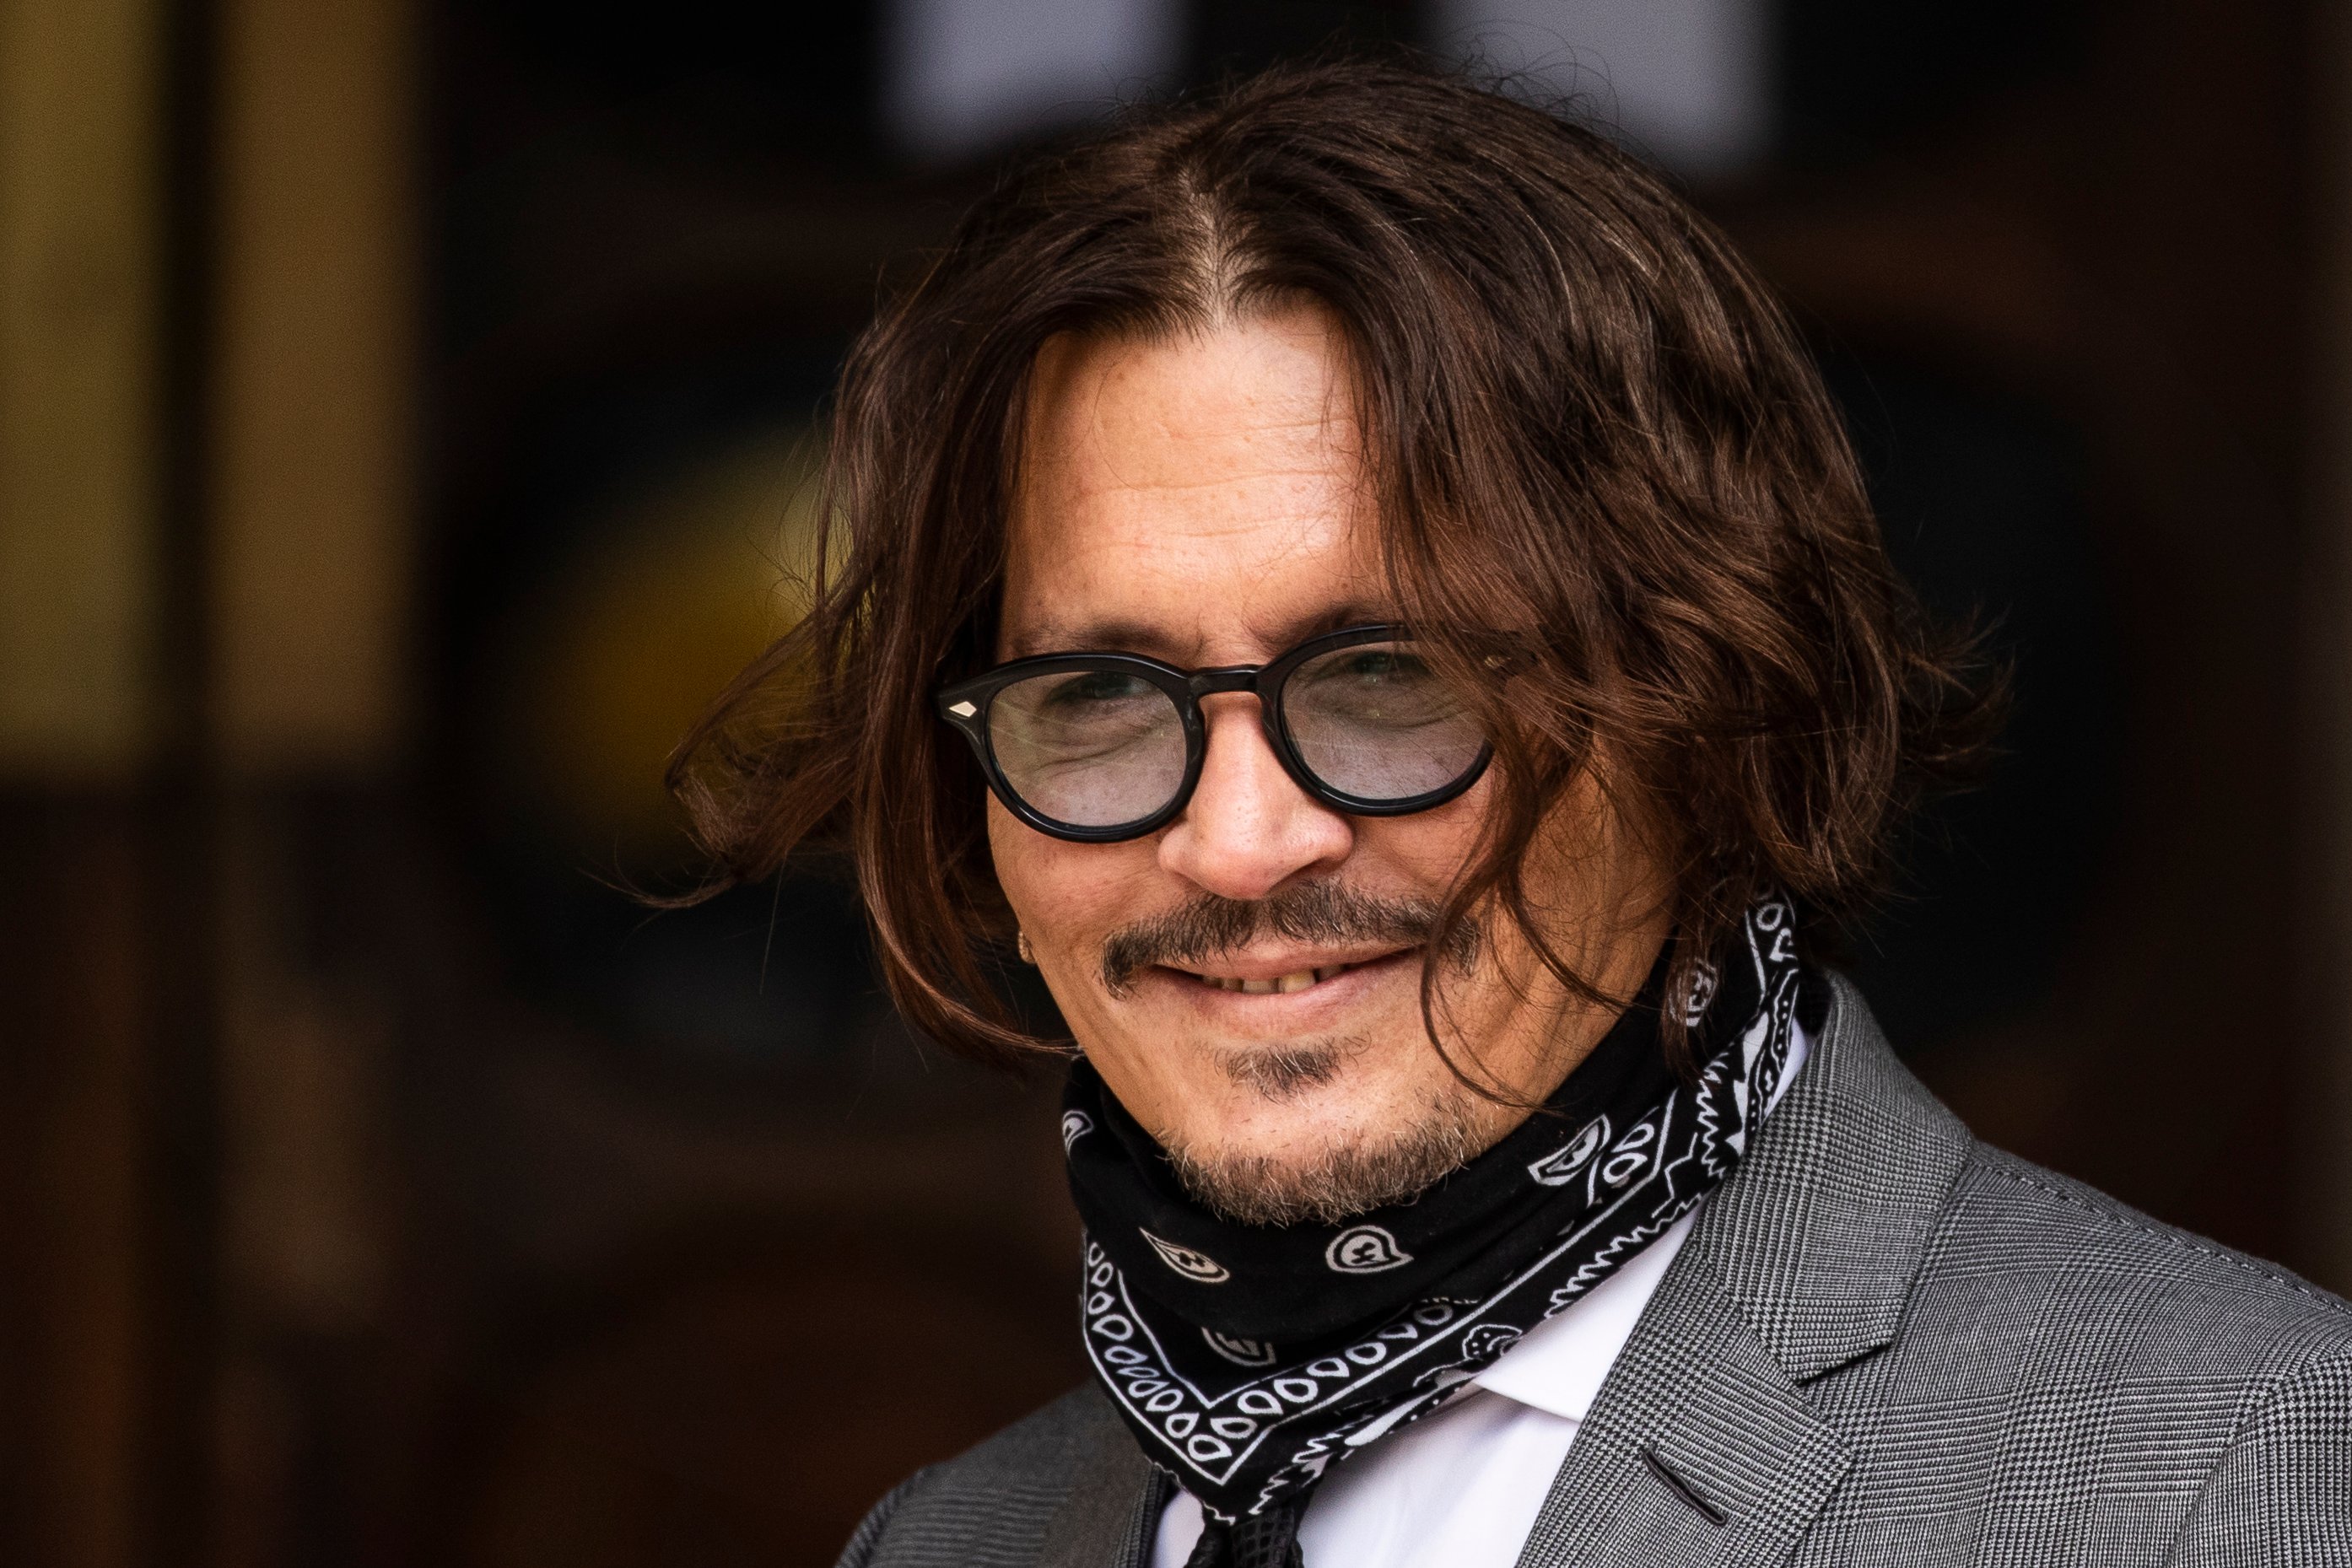 Actor Johnny Depp arrives at the Royal Courts of Justice, Strand on July 13, 2020 in London, England. American actor Johnny Depp is taking News Group Newspapers, publishers of The Sun, to court over allegations that he was violent towards his ex-wife, Amber Heard, 34.